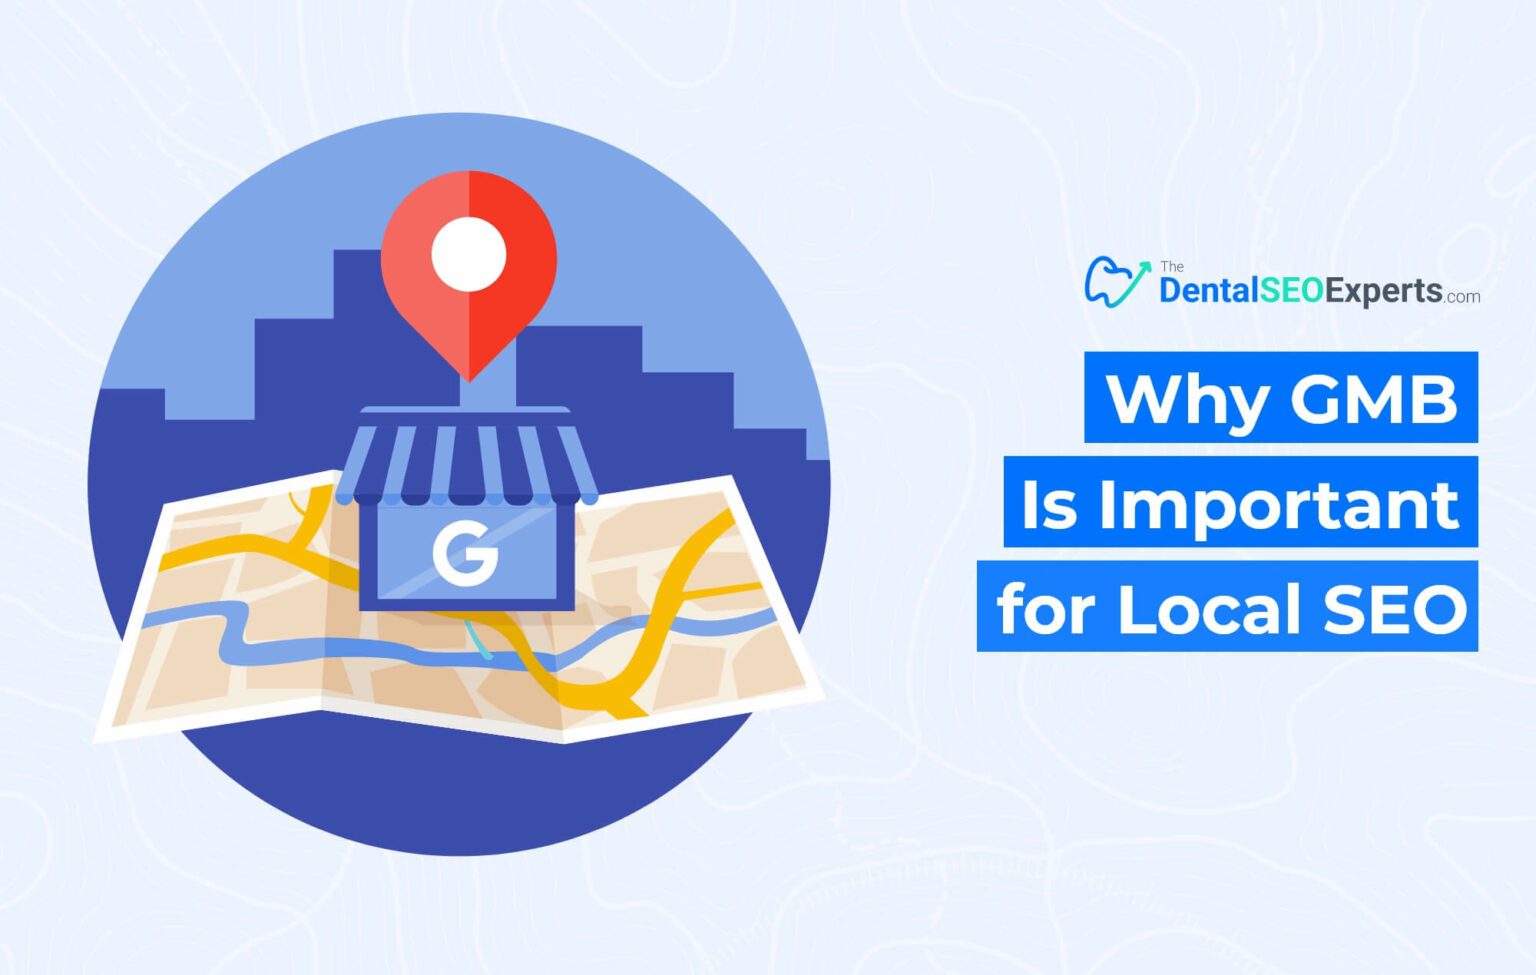 Why GMB is important for local SEO